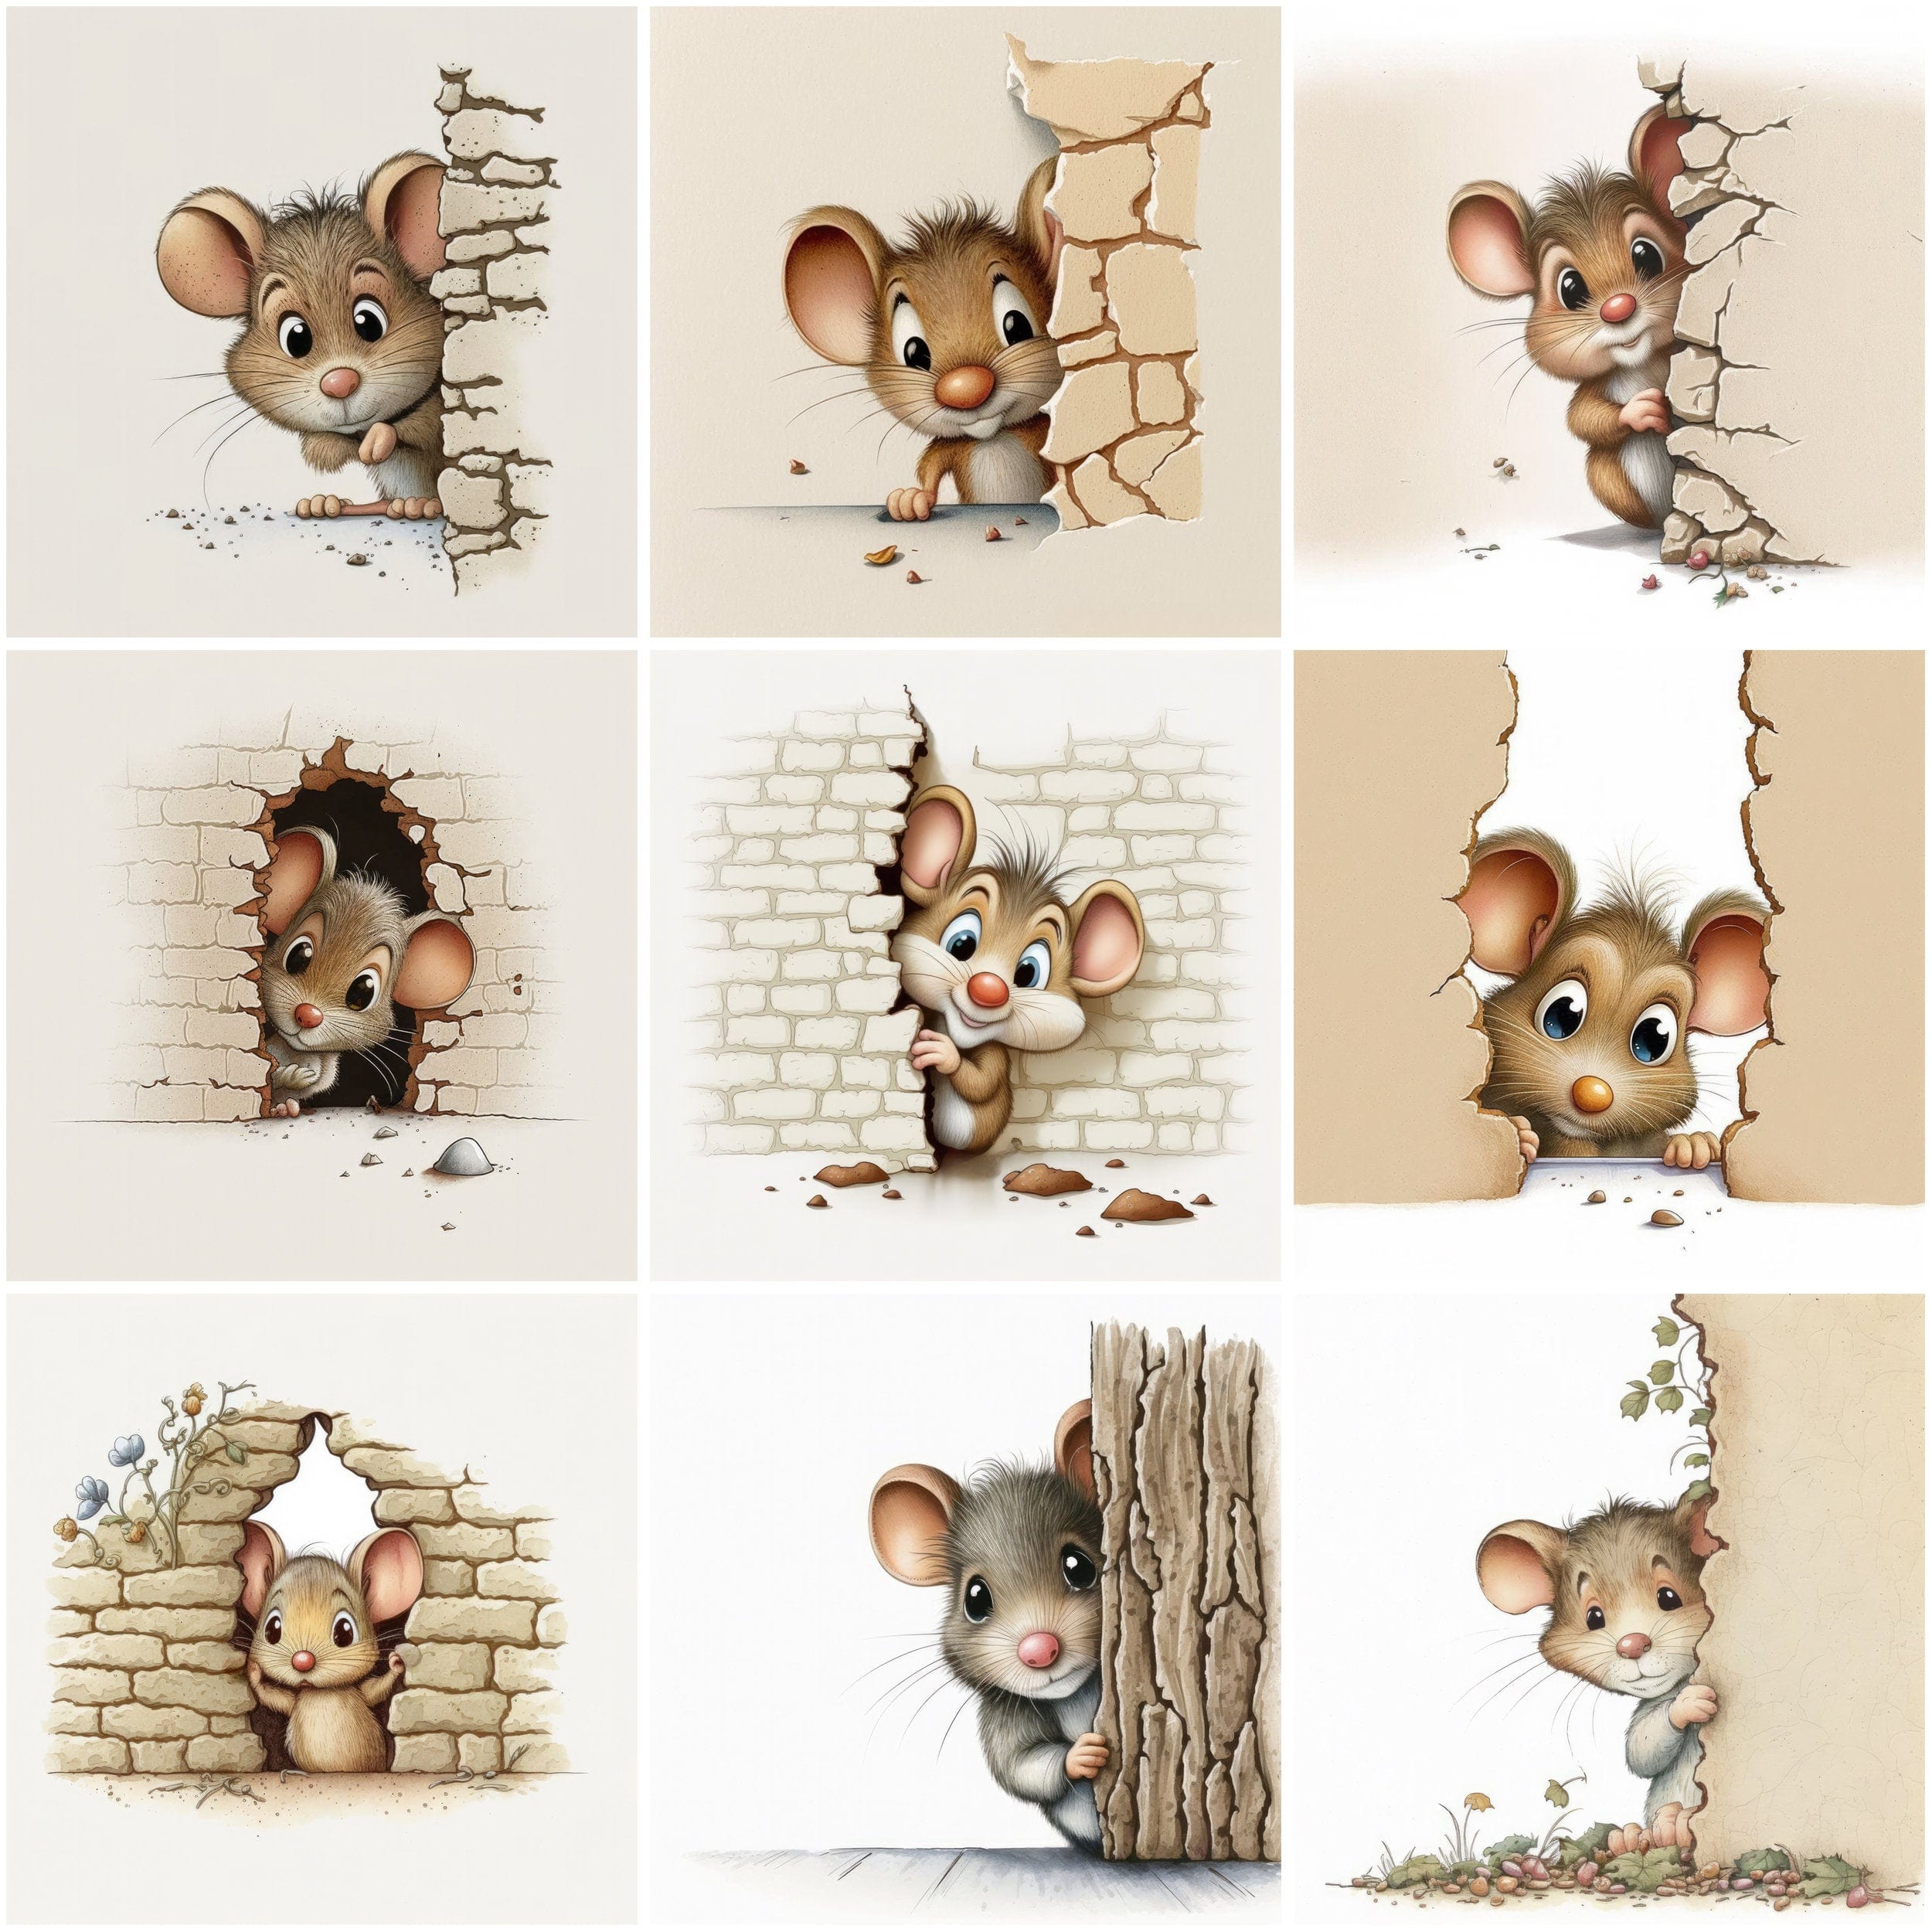 Hidden Mice Wall Art Bundle - 85 Playful and Whimsical Mouse Illustrations for Home Decor, DIY Projects, and Gifts - Commercial Use - Bundle Digital Download Sumobundle